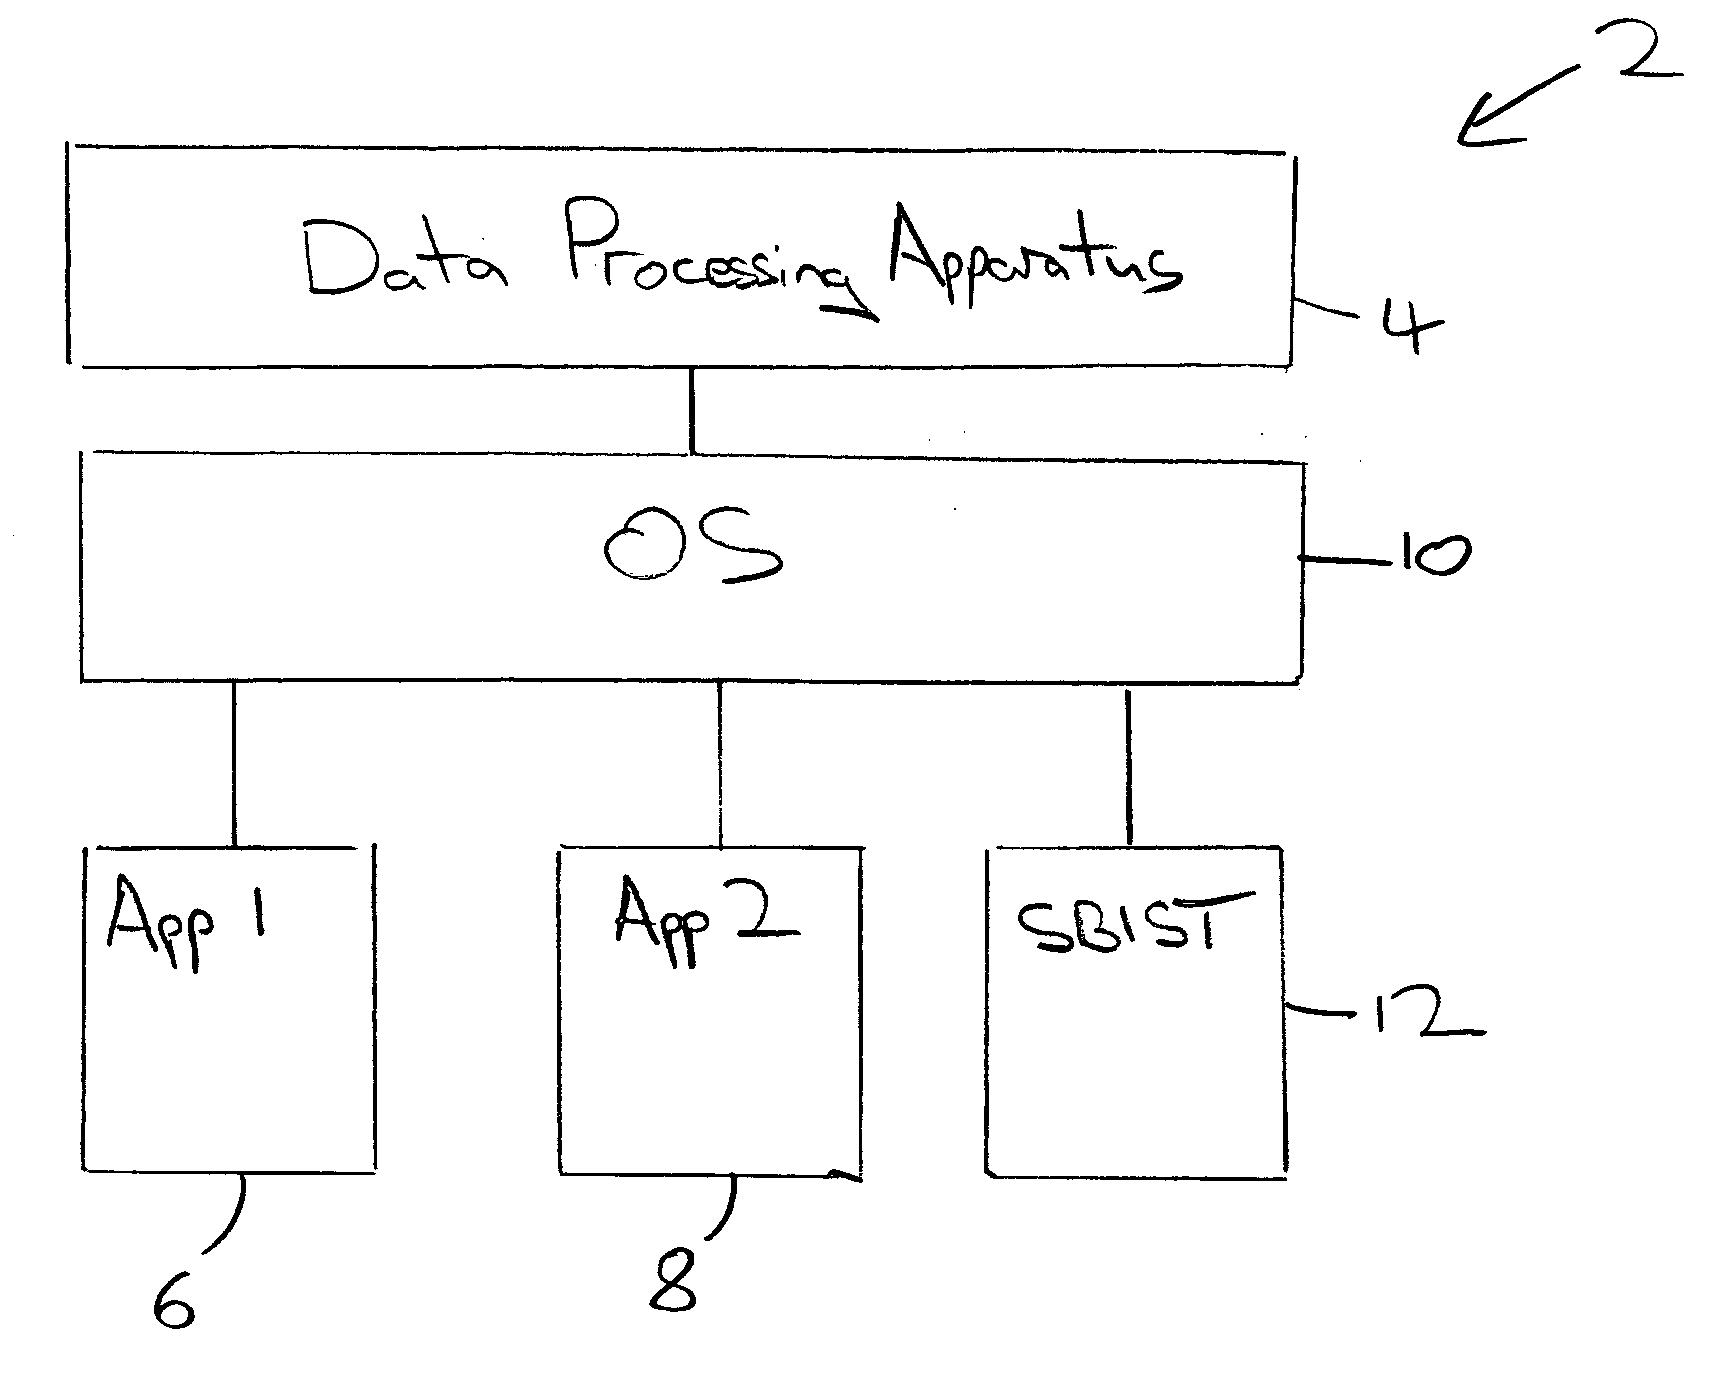 Generation of a computer program to test for correct operation of a data processing apparatus